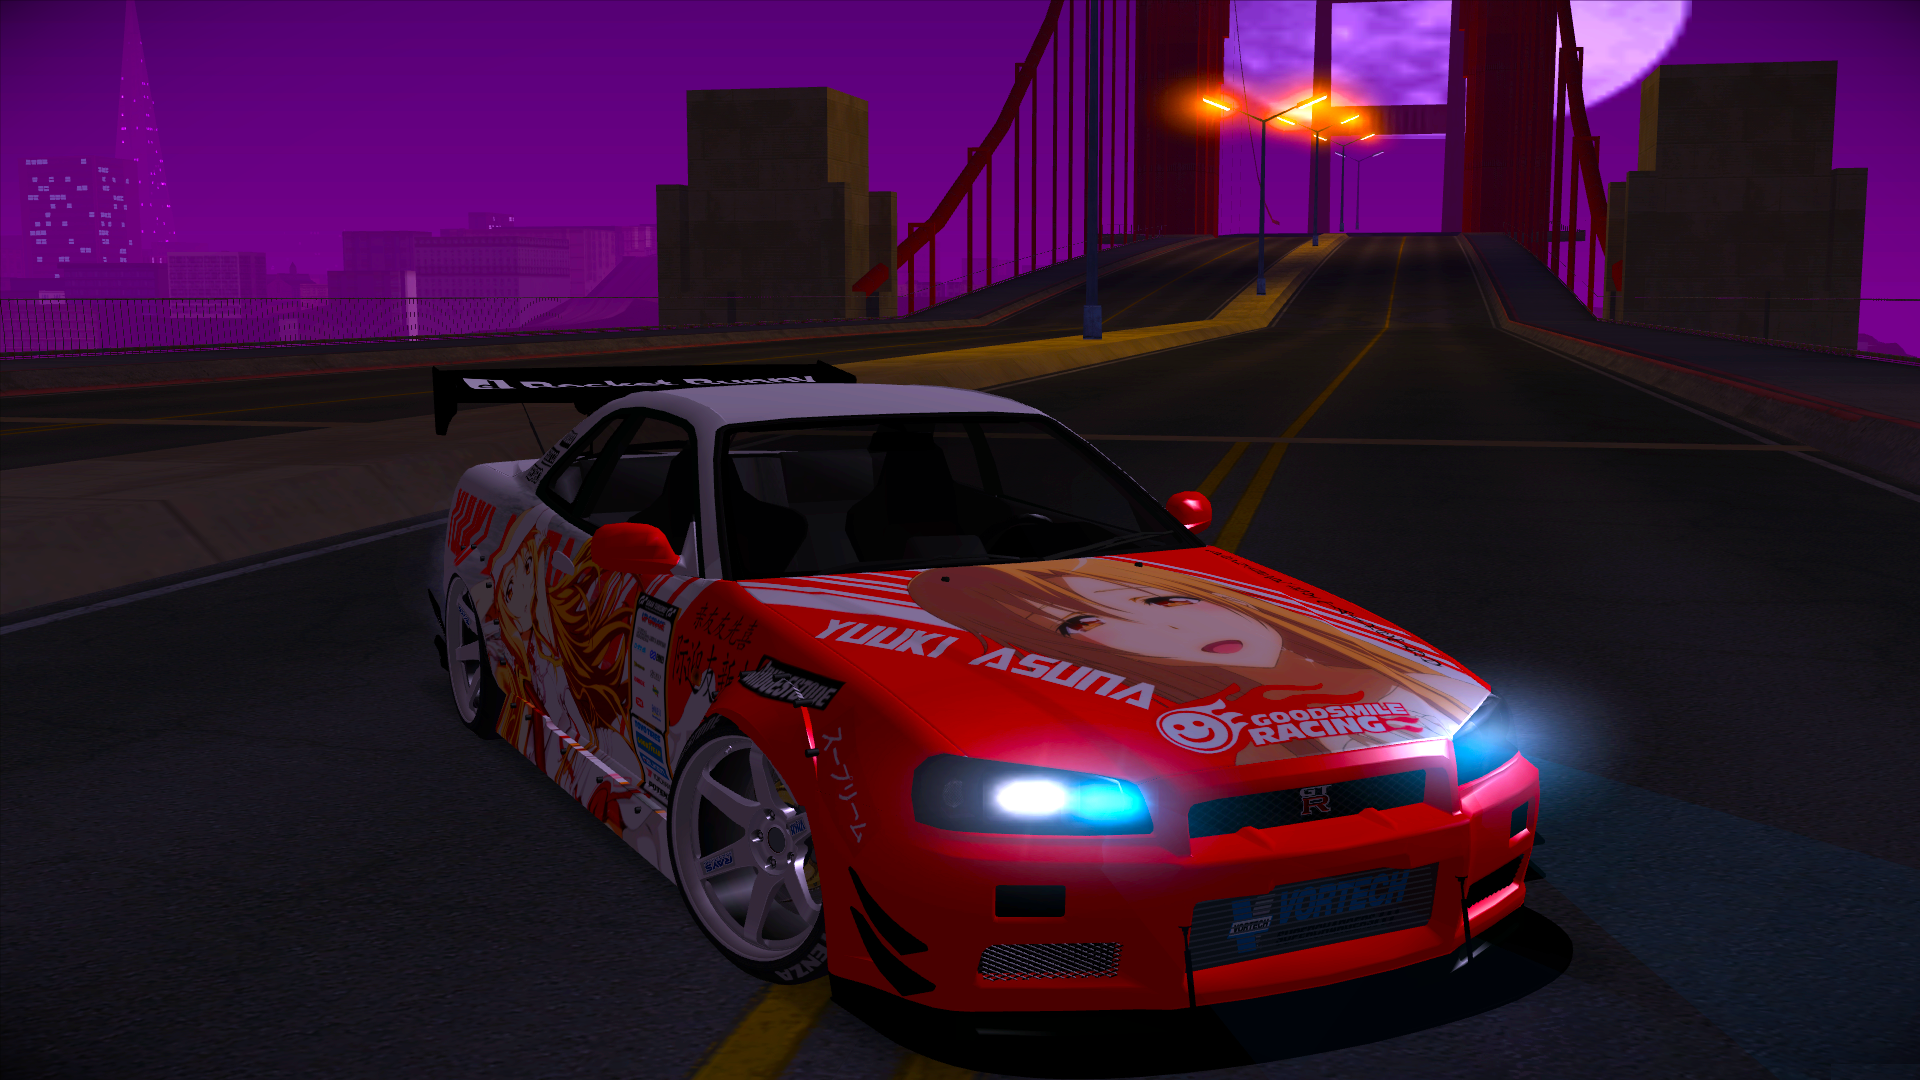 General 1920x1080 anime girls Grand Theft Auto: San Andreas Japanese cars Grand Theft Auto tuning Itasha Nissan Nissan Skyline Nissan Skyline R34 Sword Art Online Yuuki Asuna (Sword Art Online) red cars car vehicle